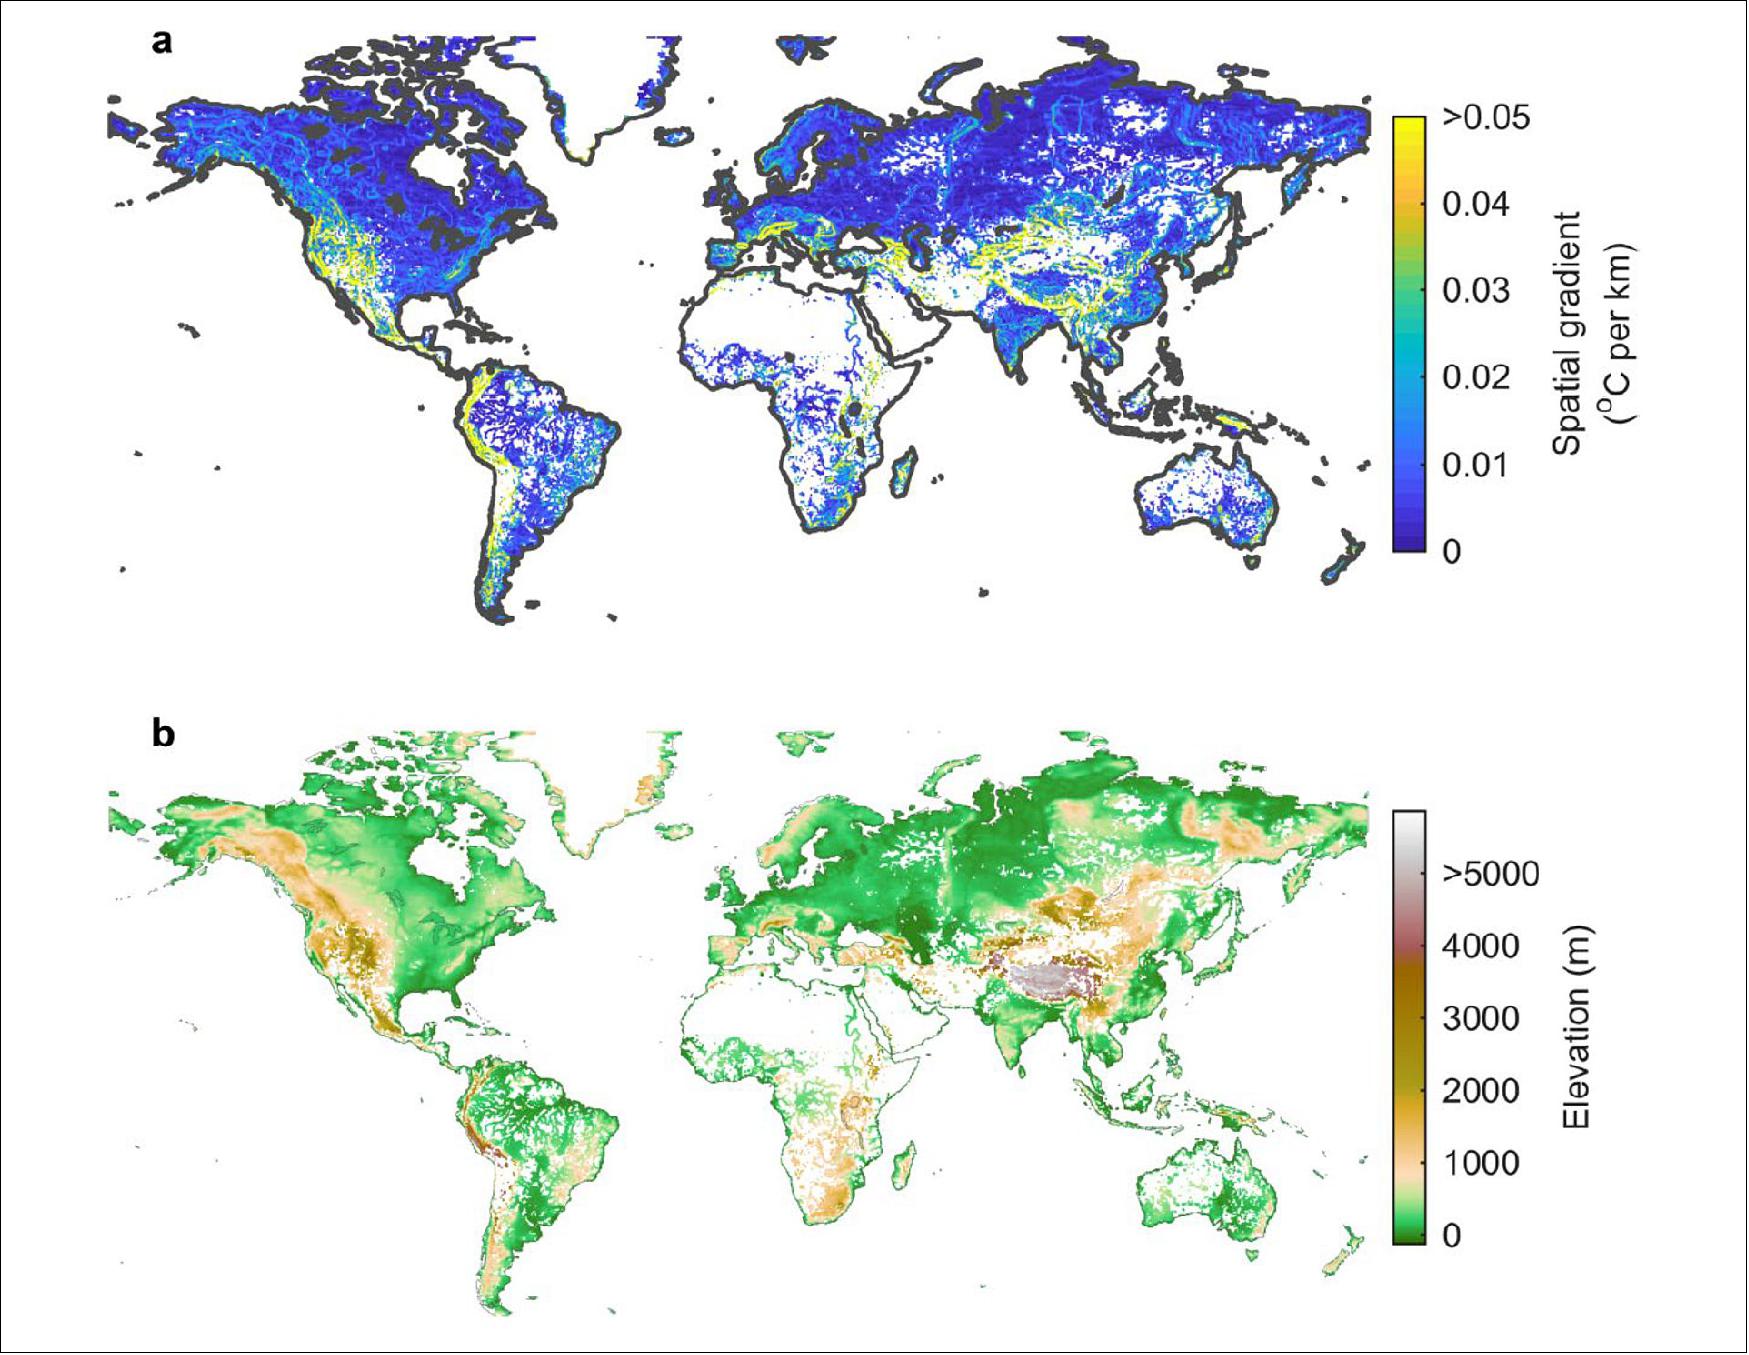 Figure 67: Global relationship between the spatial temperature gradient and elevation. Shown is comparison of a, the two-dimensional spatial gradient of surface water temperature change, and b, elevation. White regions represent those where standing waters are absent within the global database (image credit: Nature: Climate velocity in inland standing waters)